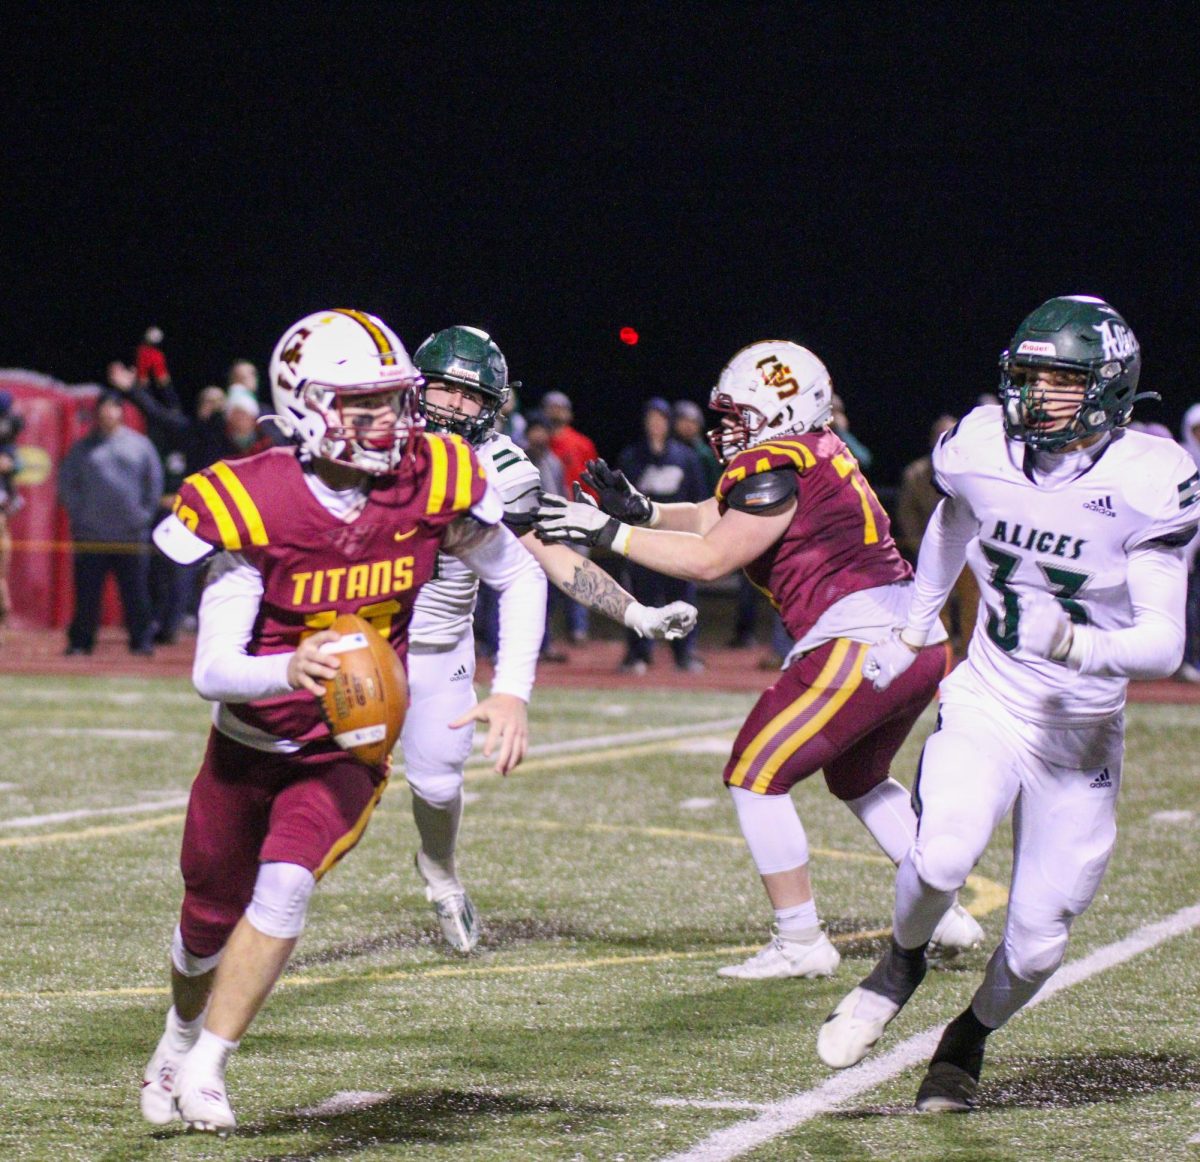 Senior quarterback Tanner Boyd looks for an open receiver during the Sectional championship against Vincennes Lincoln.